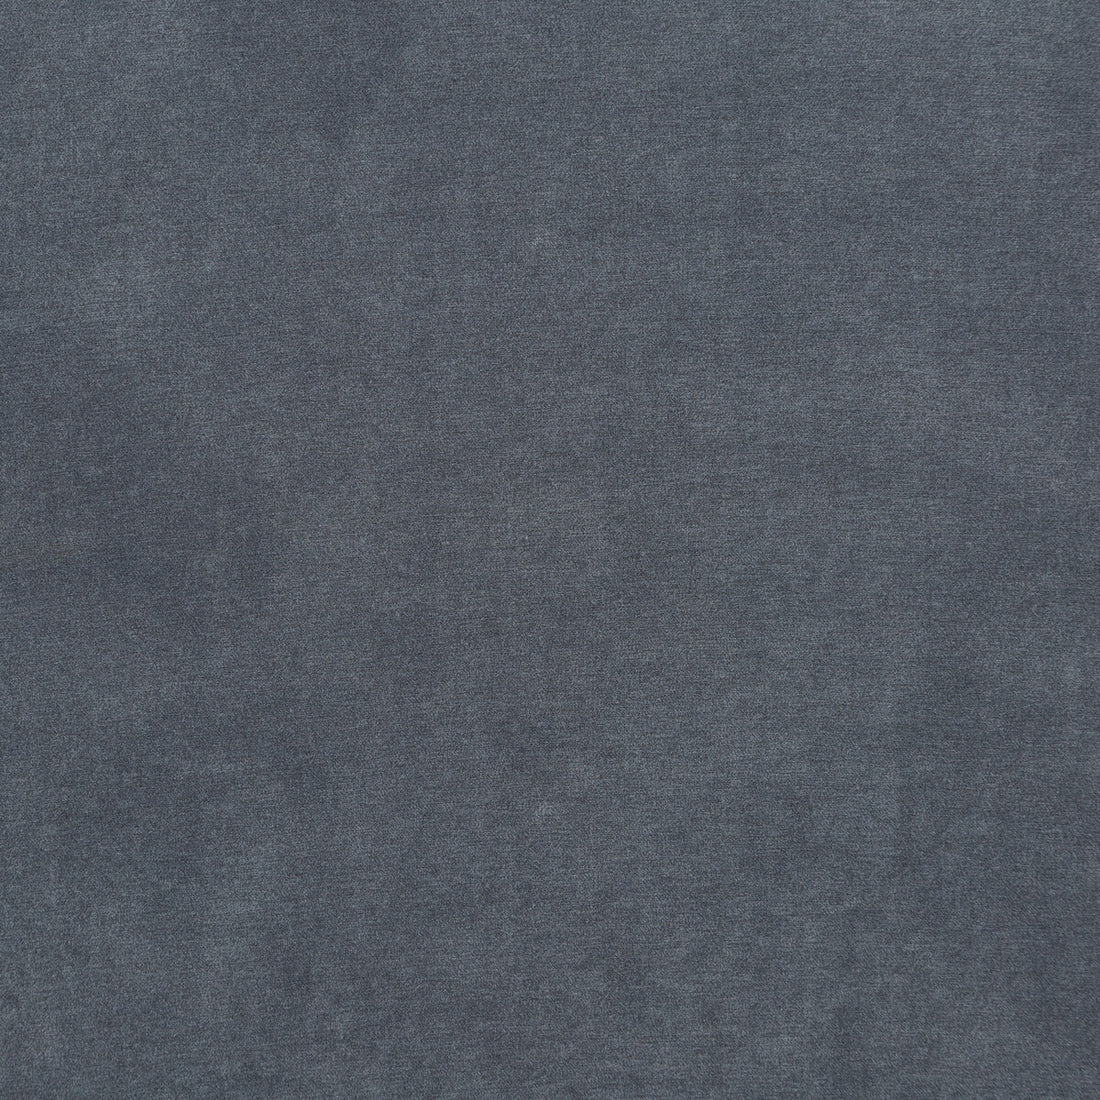 Cadogan fabric in slate blue color - pattern PF50439.658.0 - by Baker Lifestyle in the Carnival collection